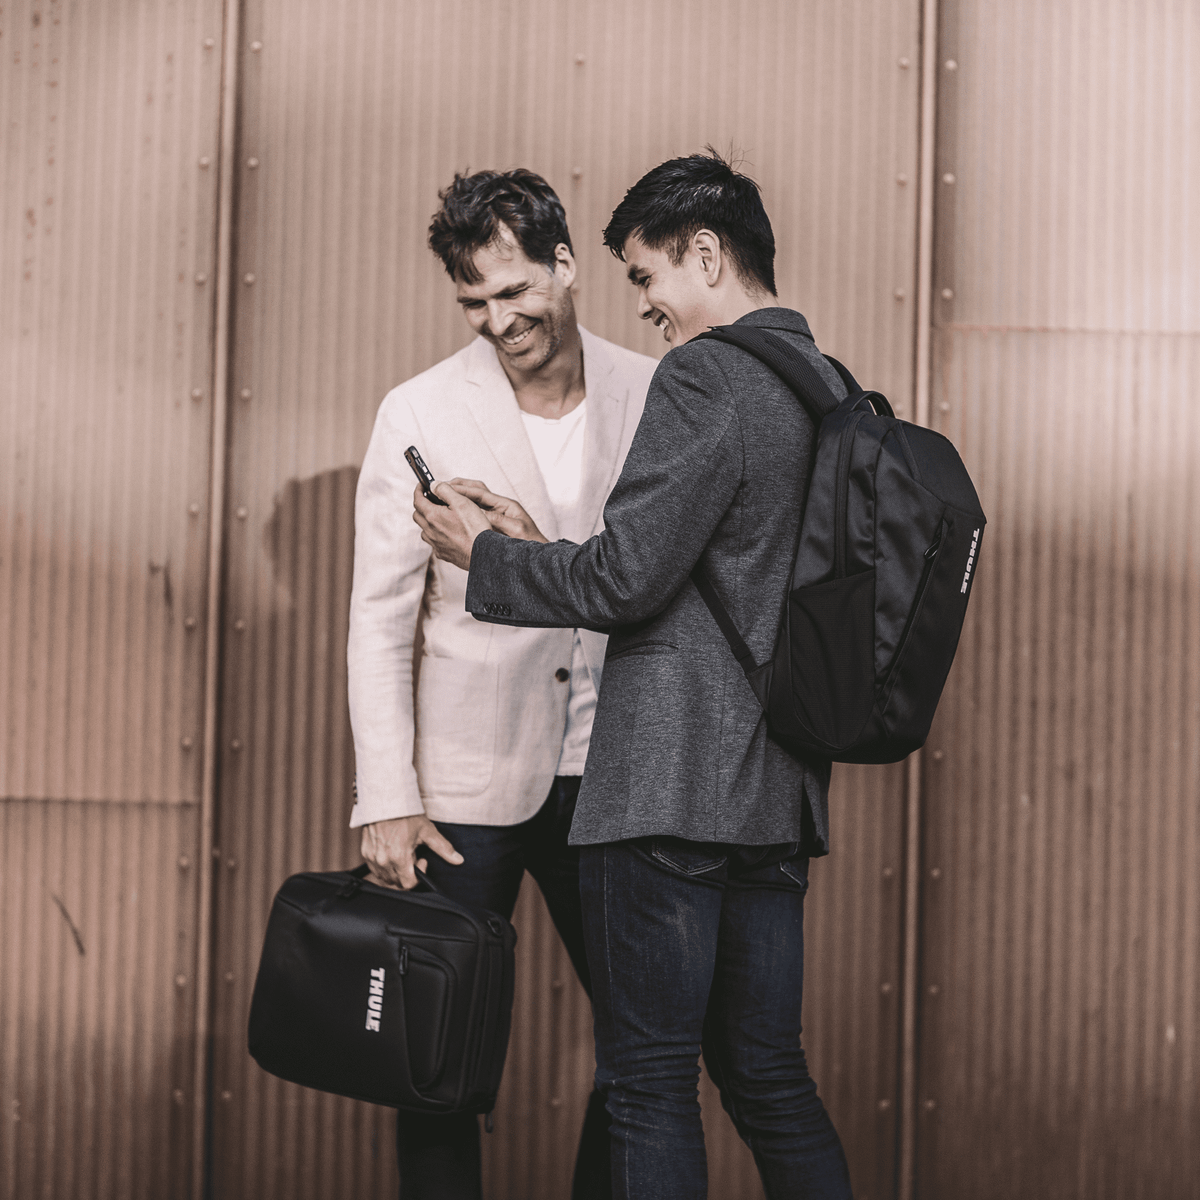 Two men look at the screen of a phone, one is carrying a backpack and the other is holding the Thule Accent Laptop Bag.